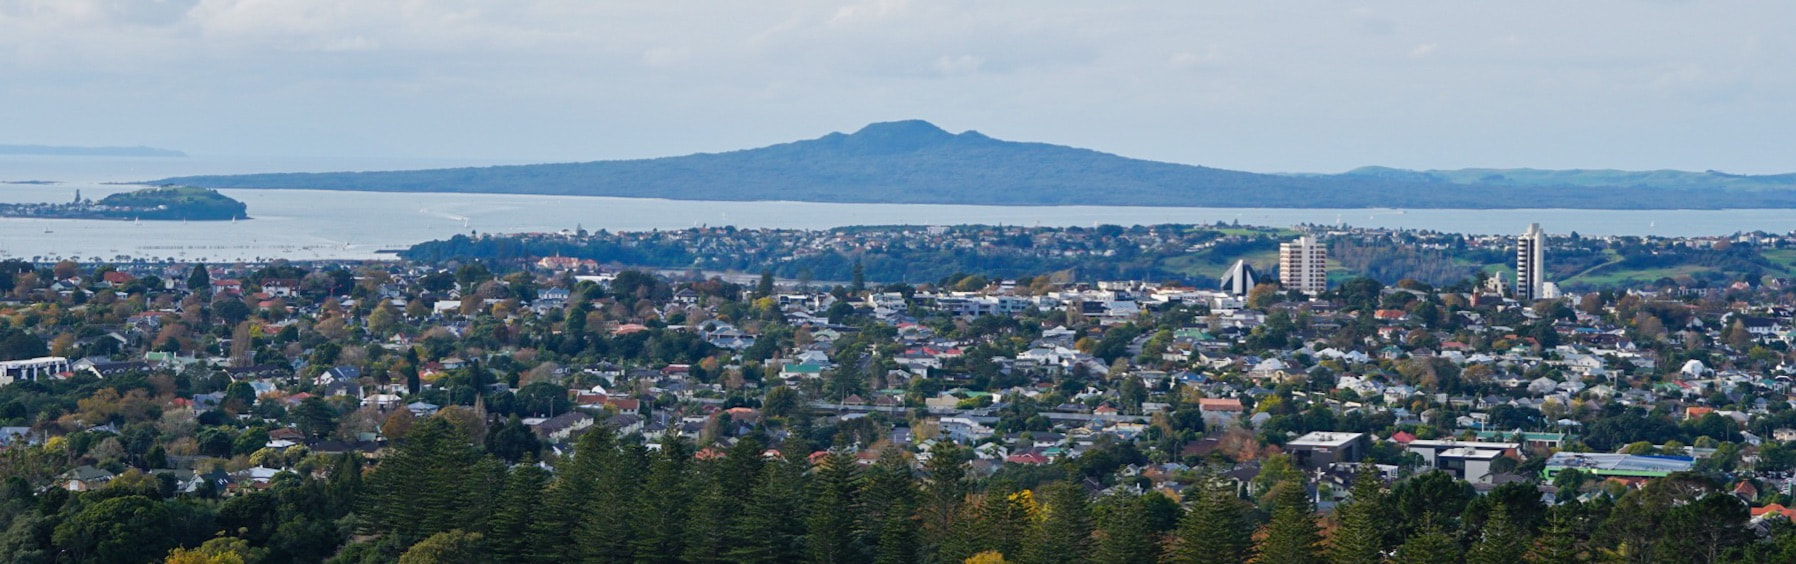 Sony a6300 + Sony FE 24-70mm F2.8 GM sample photo. Rangitoto in auckland, nz photography